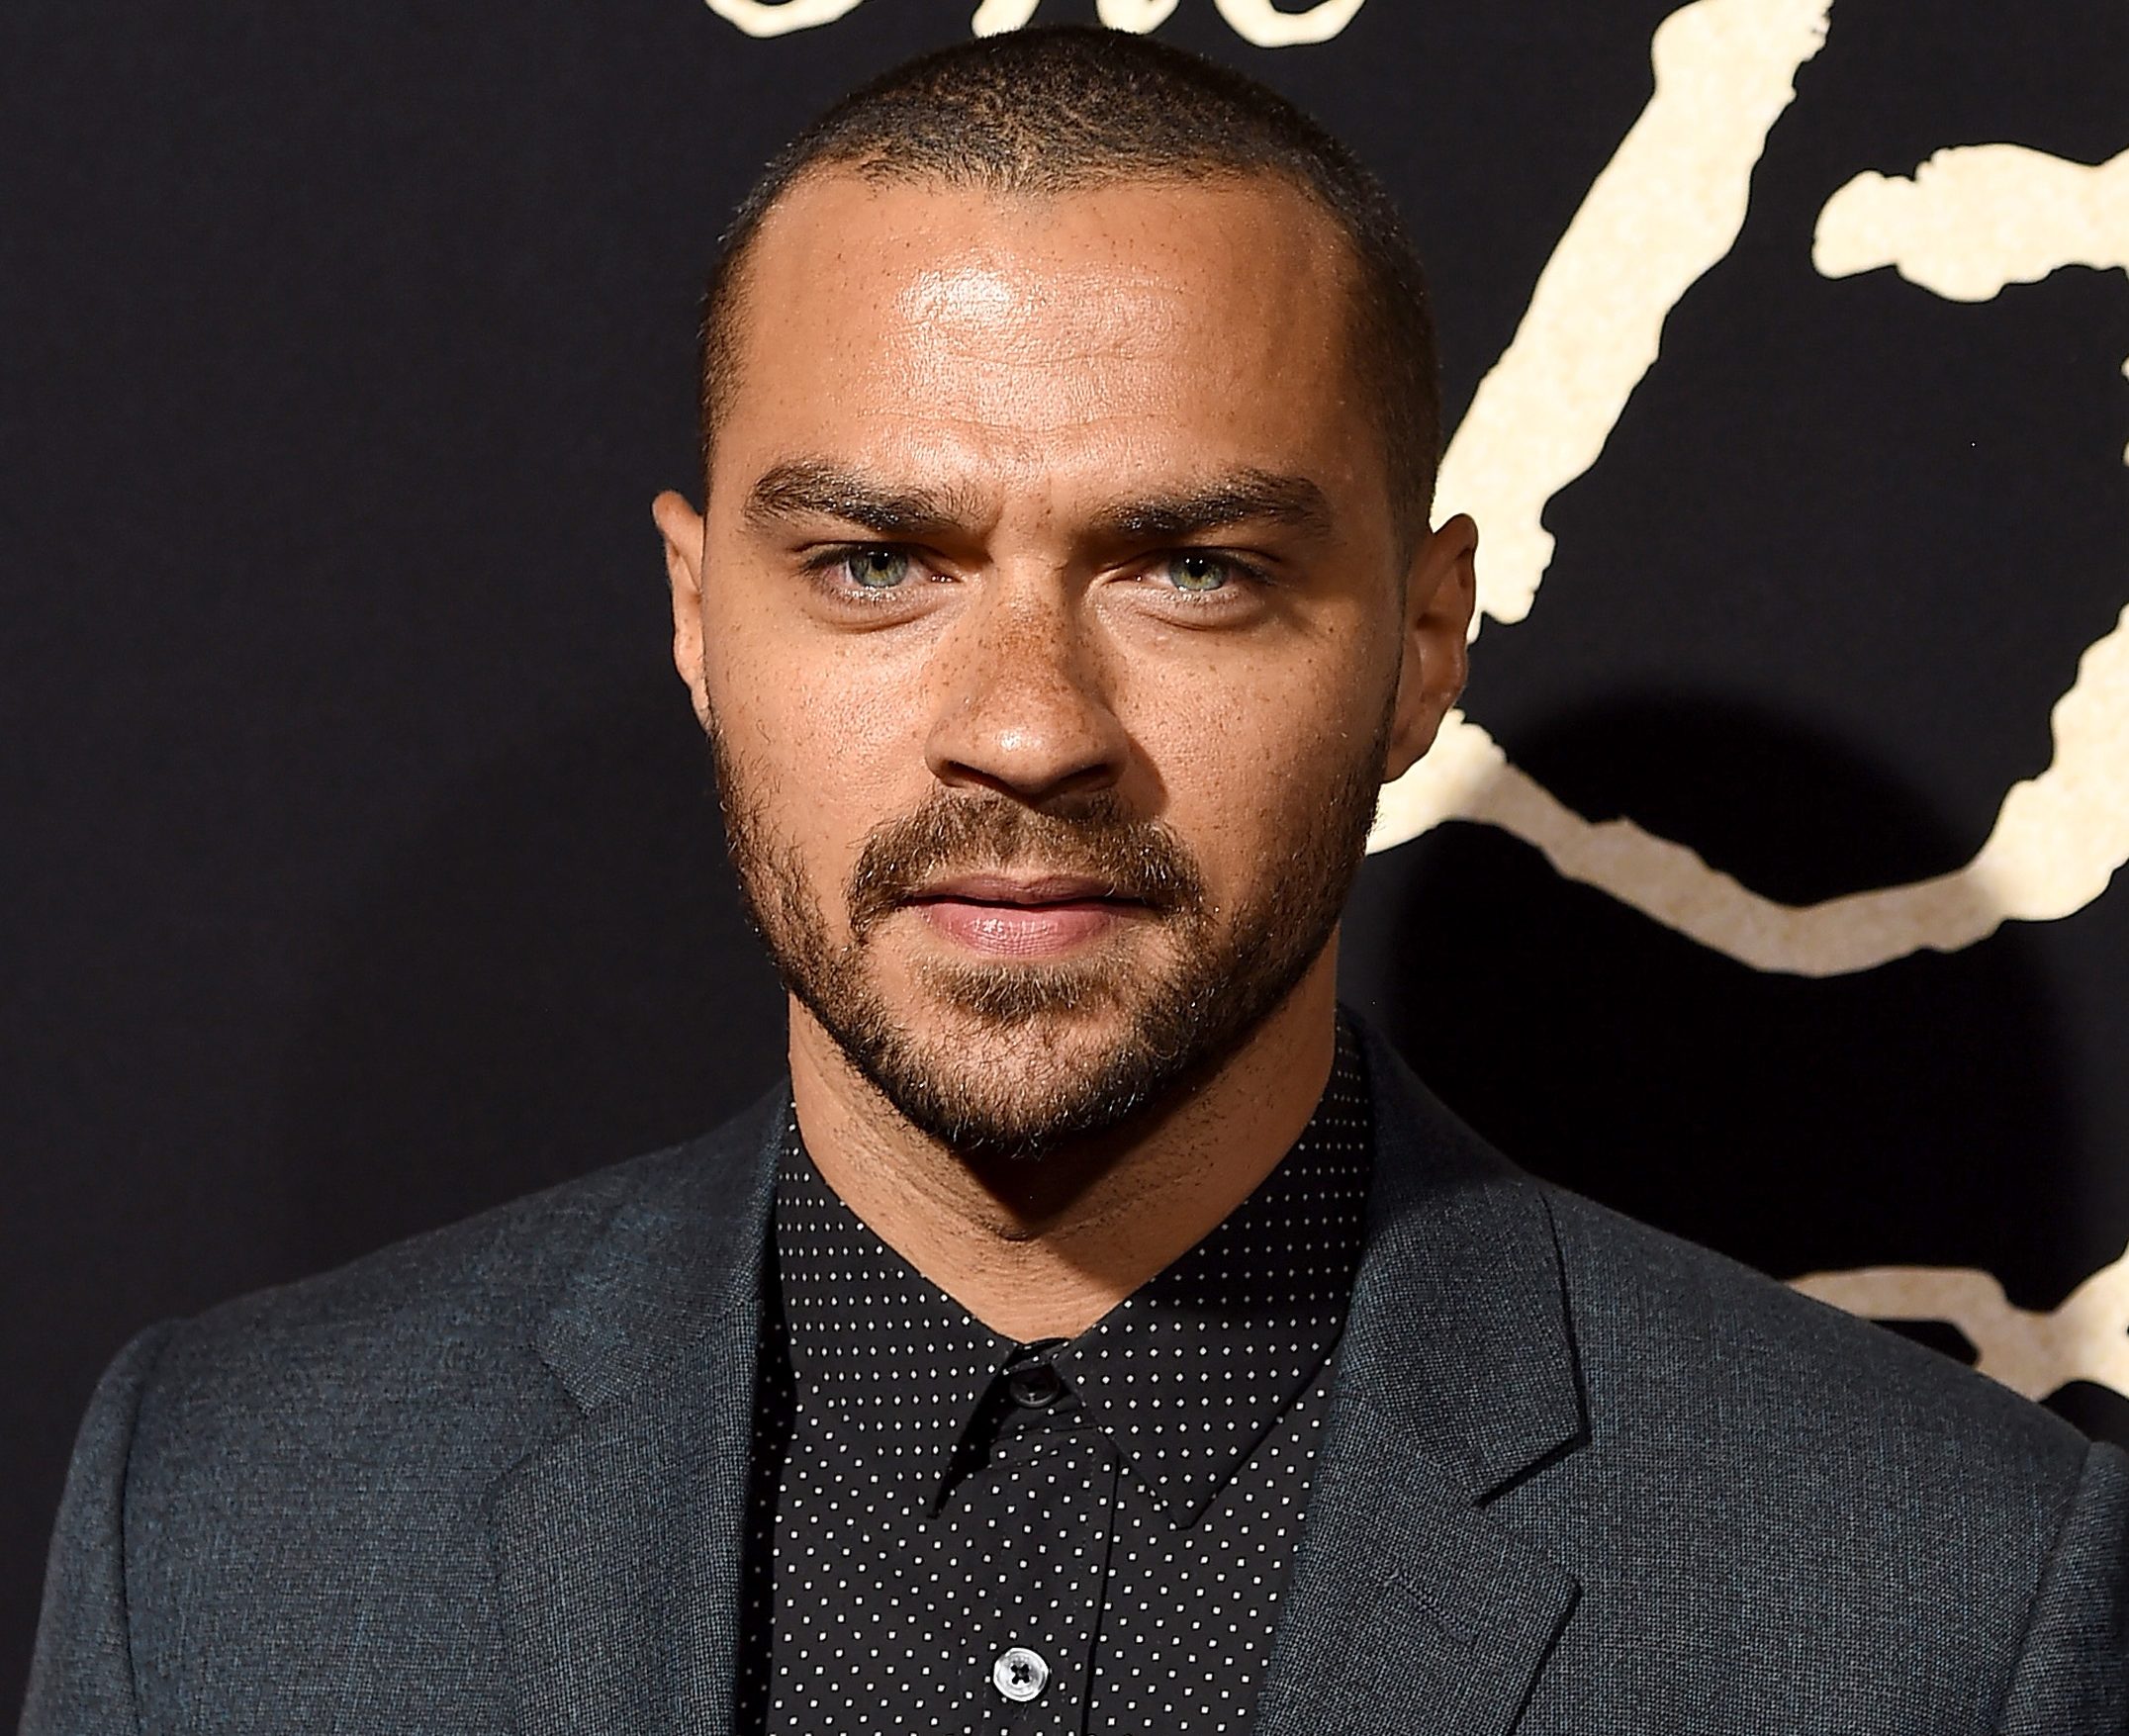 Jesse Williams leak: Take Me Out bosses install infrared cameras after nude scene emerges